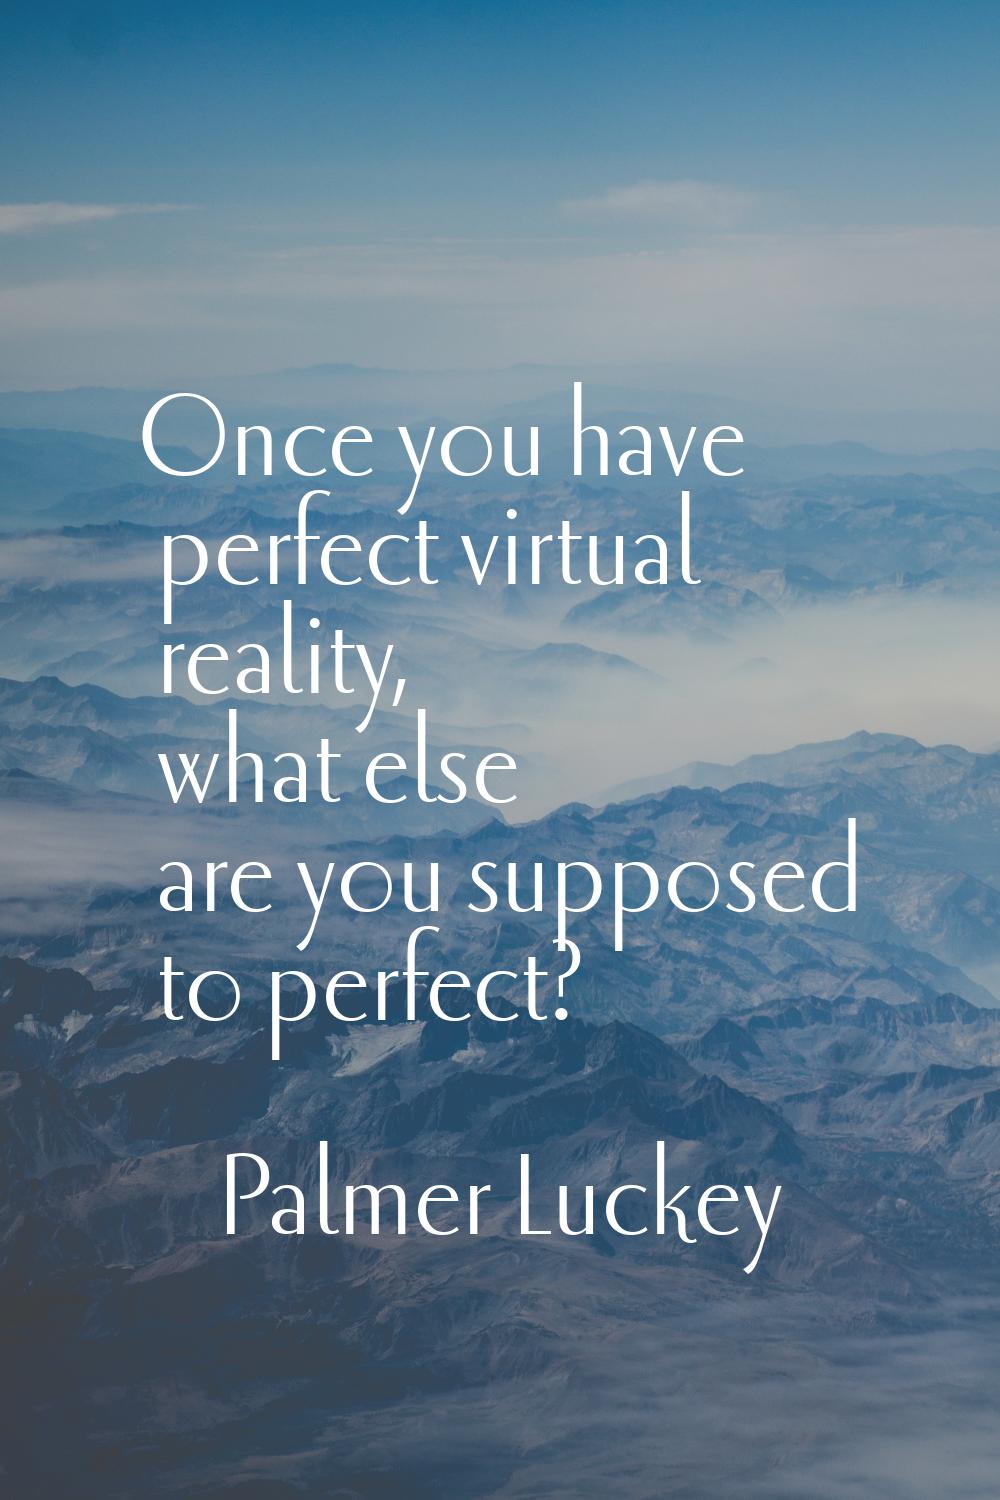 Once you have perfect virtual reality, what else are you supposed to perfect?